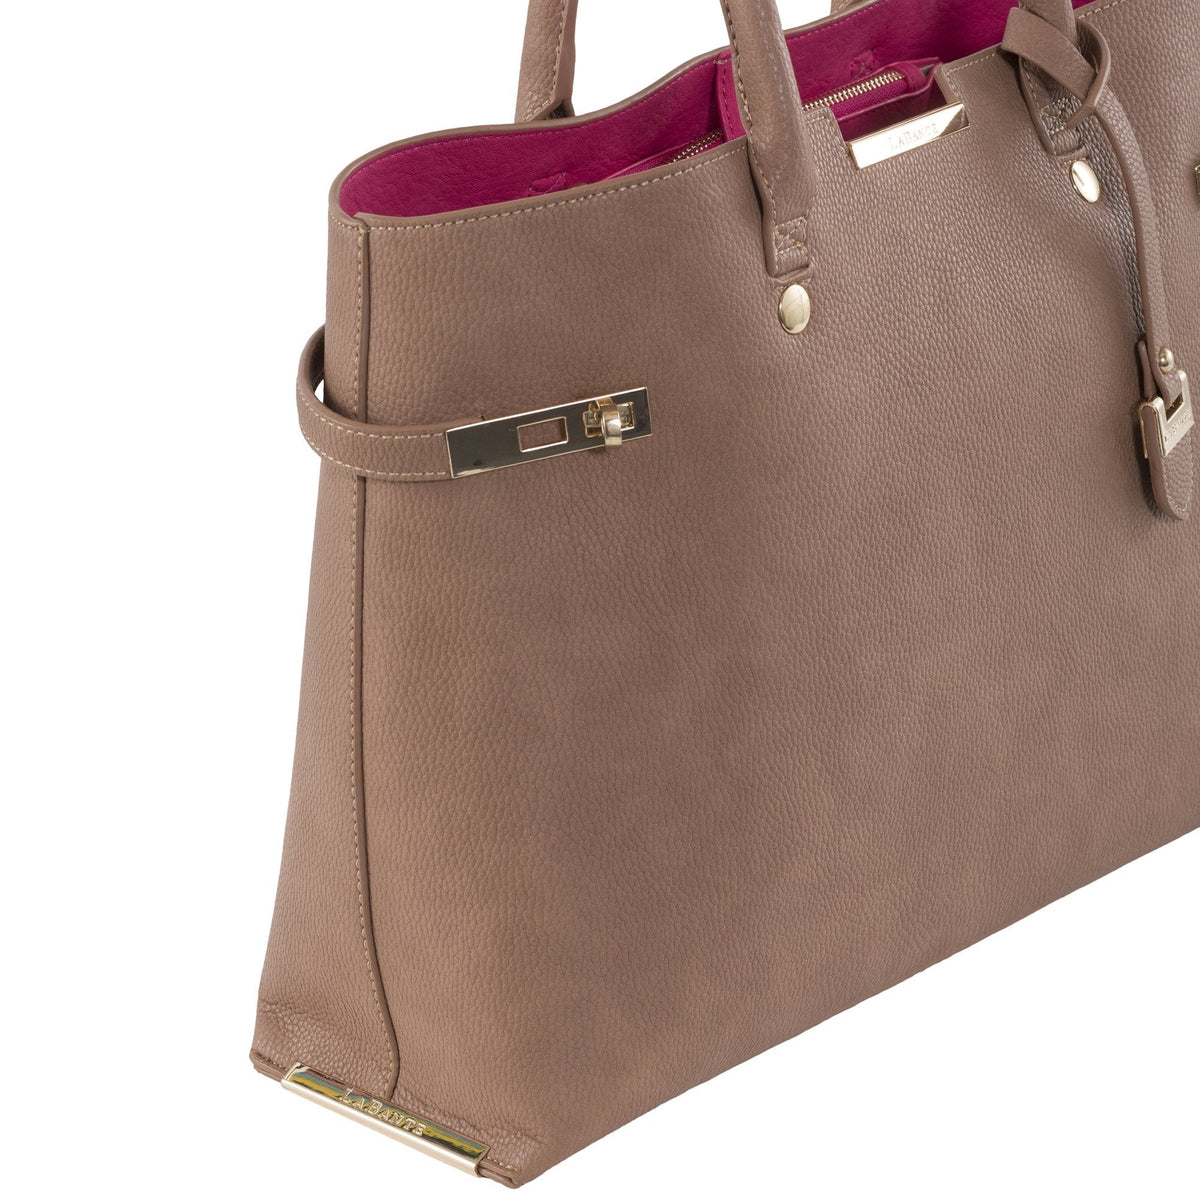 The Windsor Ethical Non-Leather Tote Bag by LaBante London